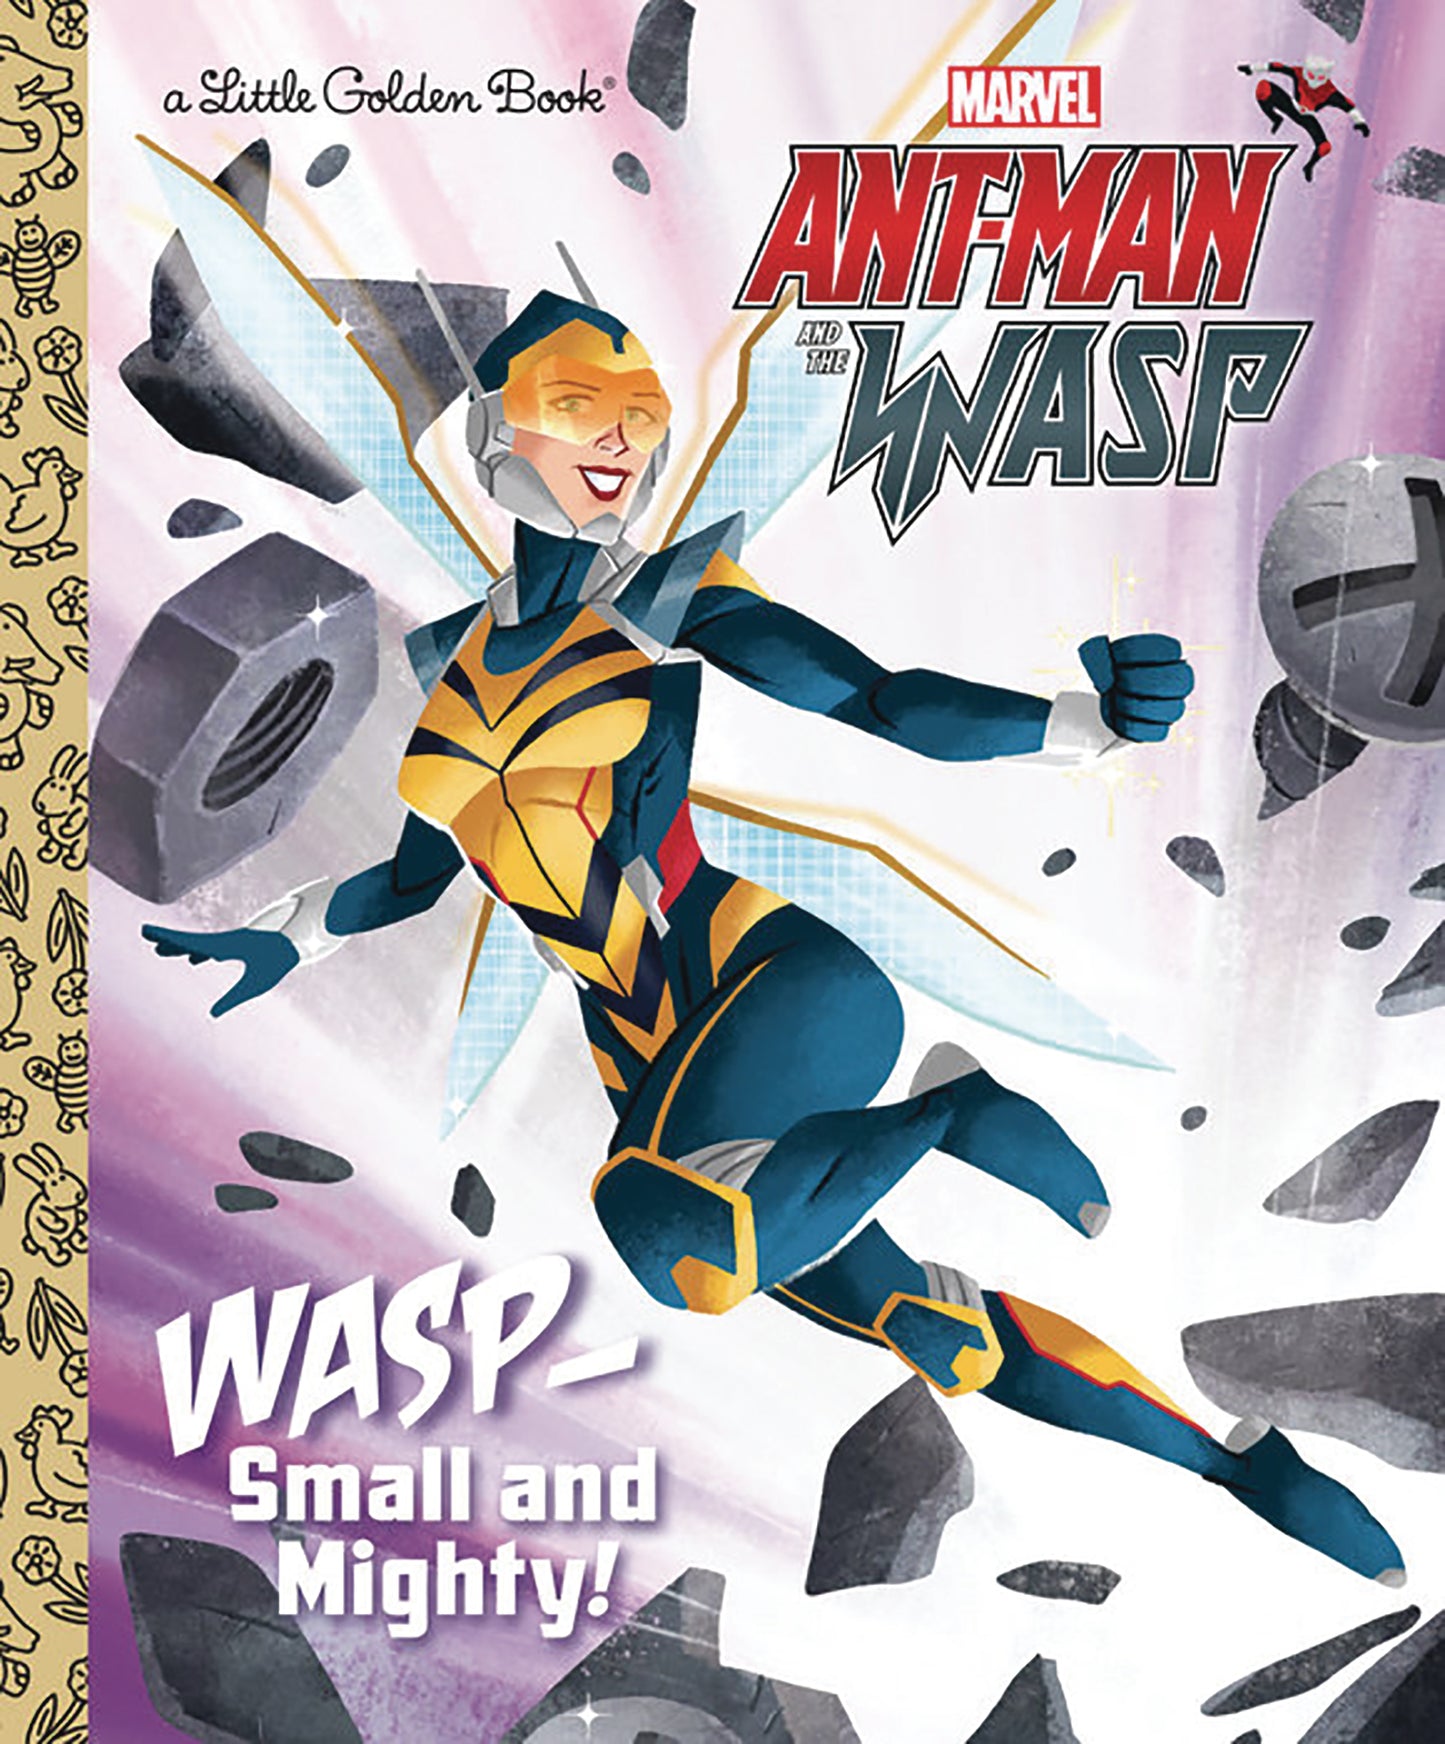 Little Golden Book Marvel Ant-Man & Wasp Small And Mighty